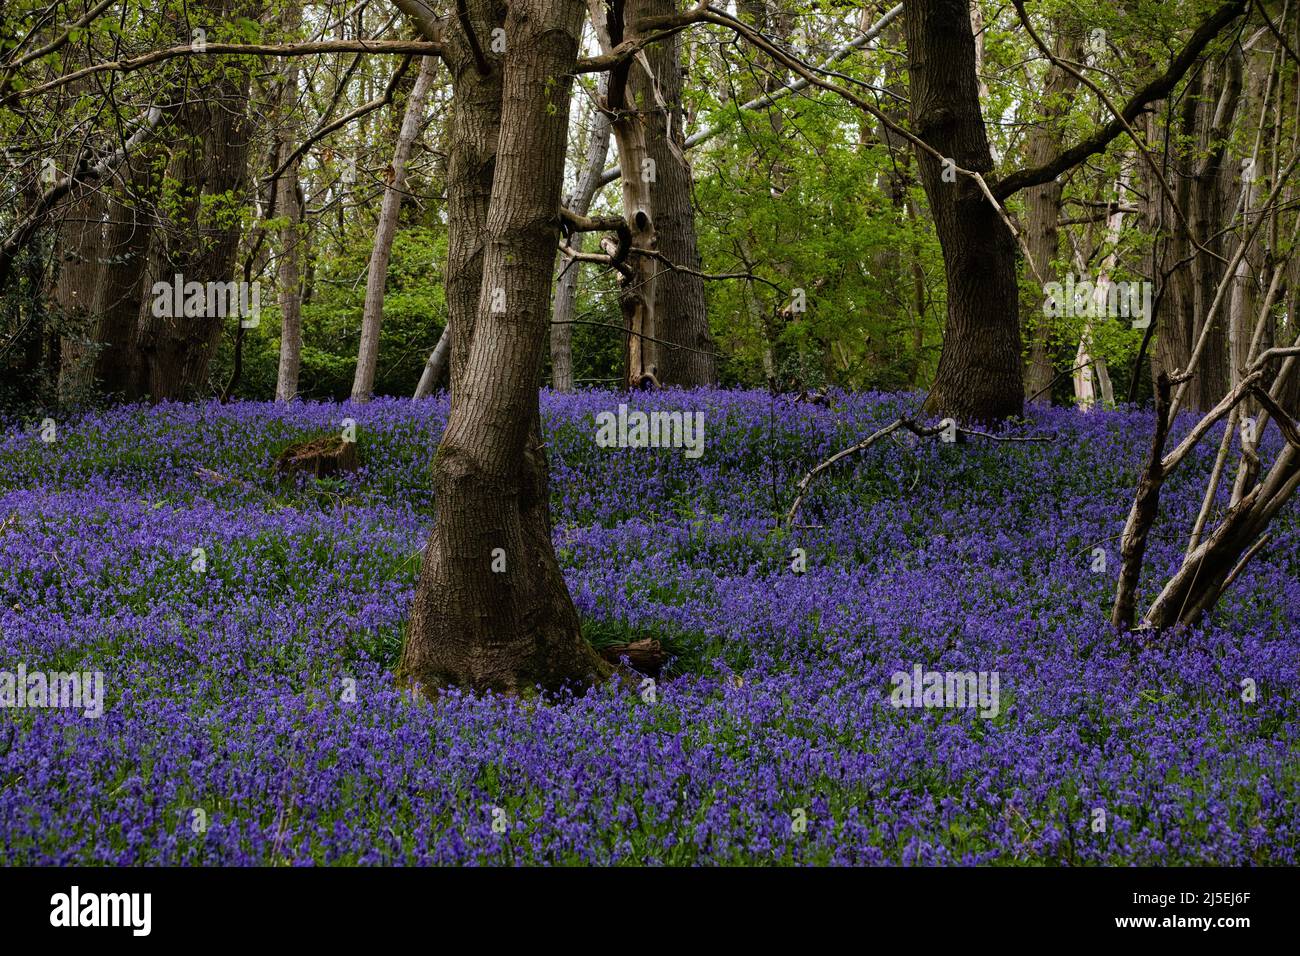 Sulham, UK. 22nd April, 2022. English bluebells are pictured in Sulham Woods. The UK is home to over half of the world's population of bluebells, split between the native English or British bluebell (Hyacinthoides non-scripta) found in Sulham Woods, which is protected under the Wildlife and Countryside Act 1981, and the fast spreading Spanish bluebell (Hyacinthoides hispanica). Credit: Mark Kerrison/Alamy Live News Stock Photo